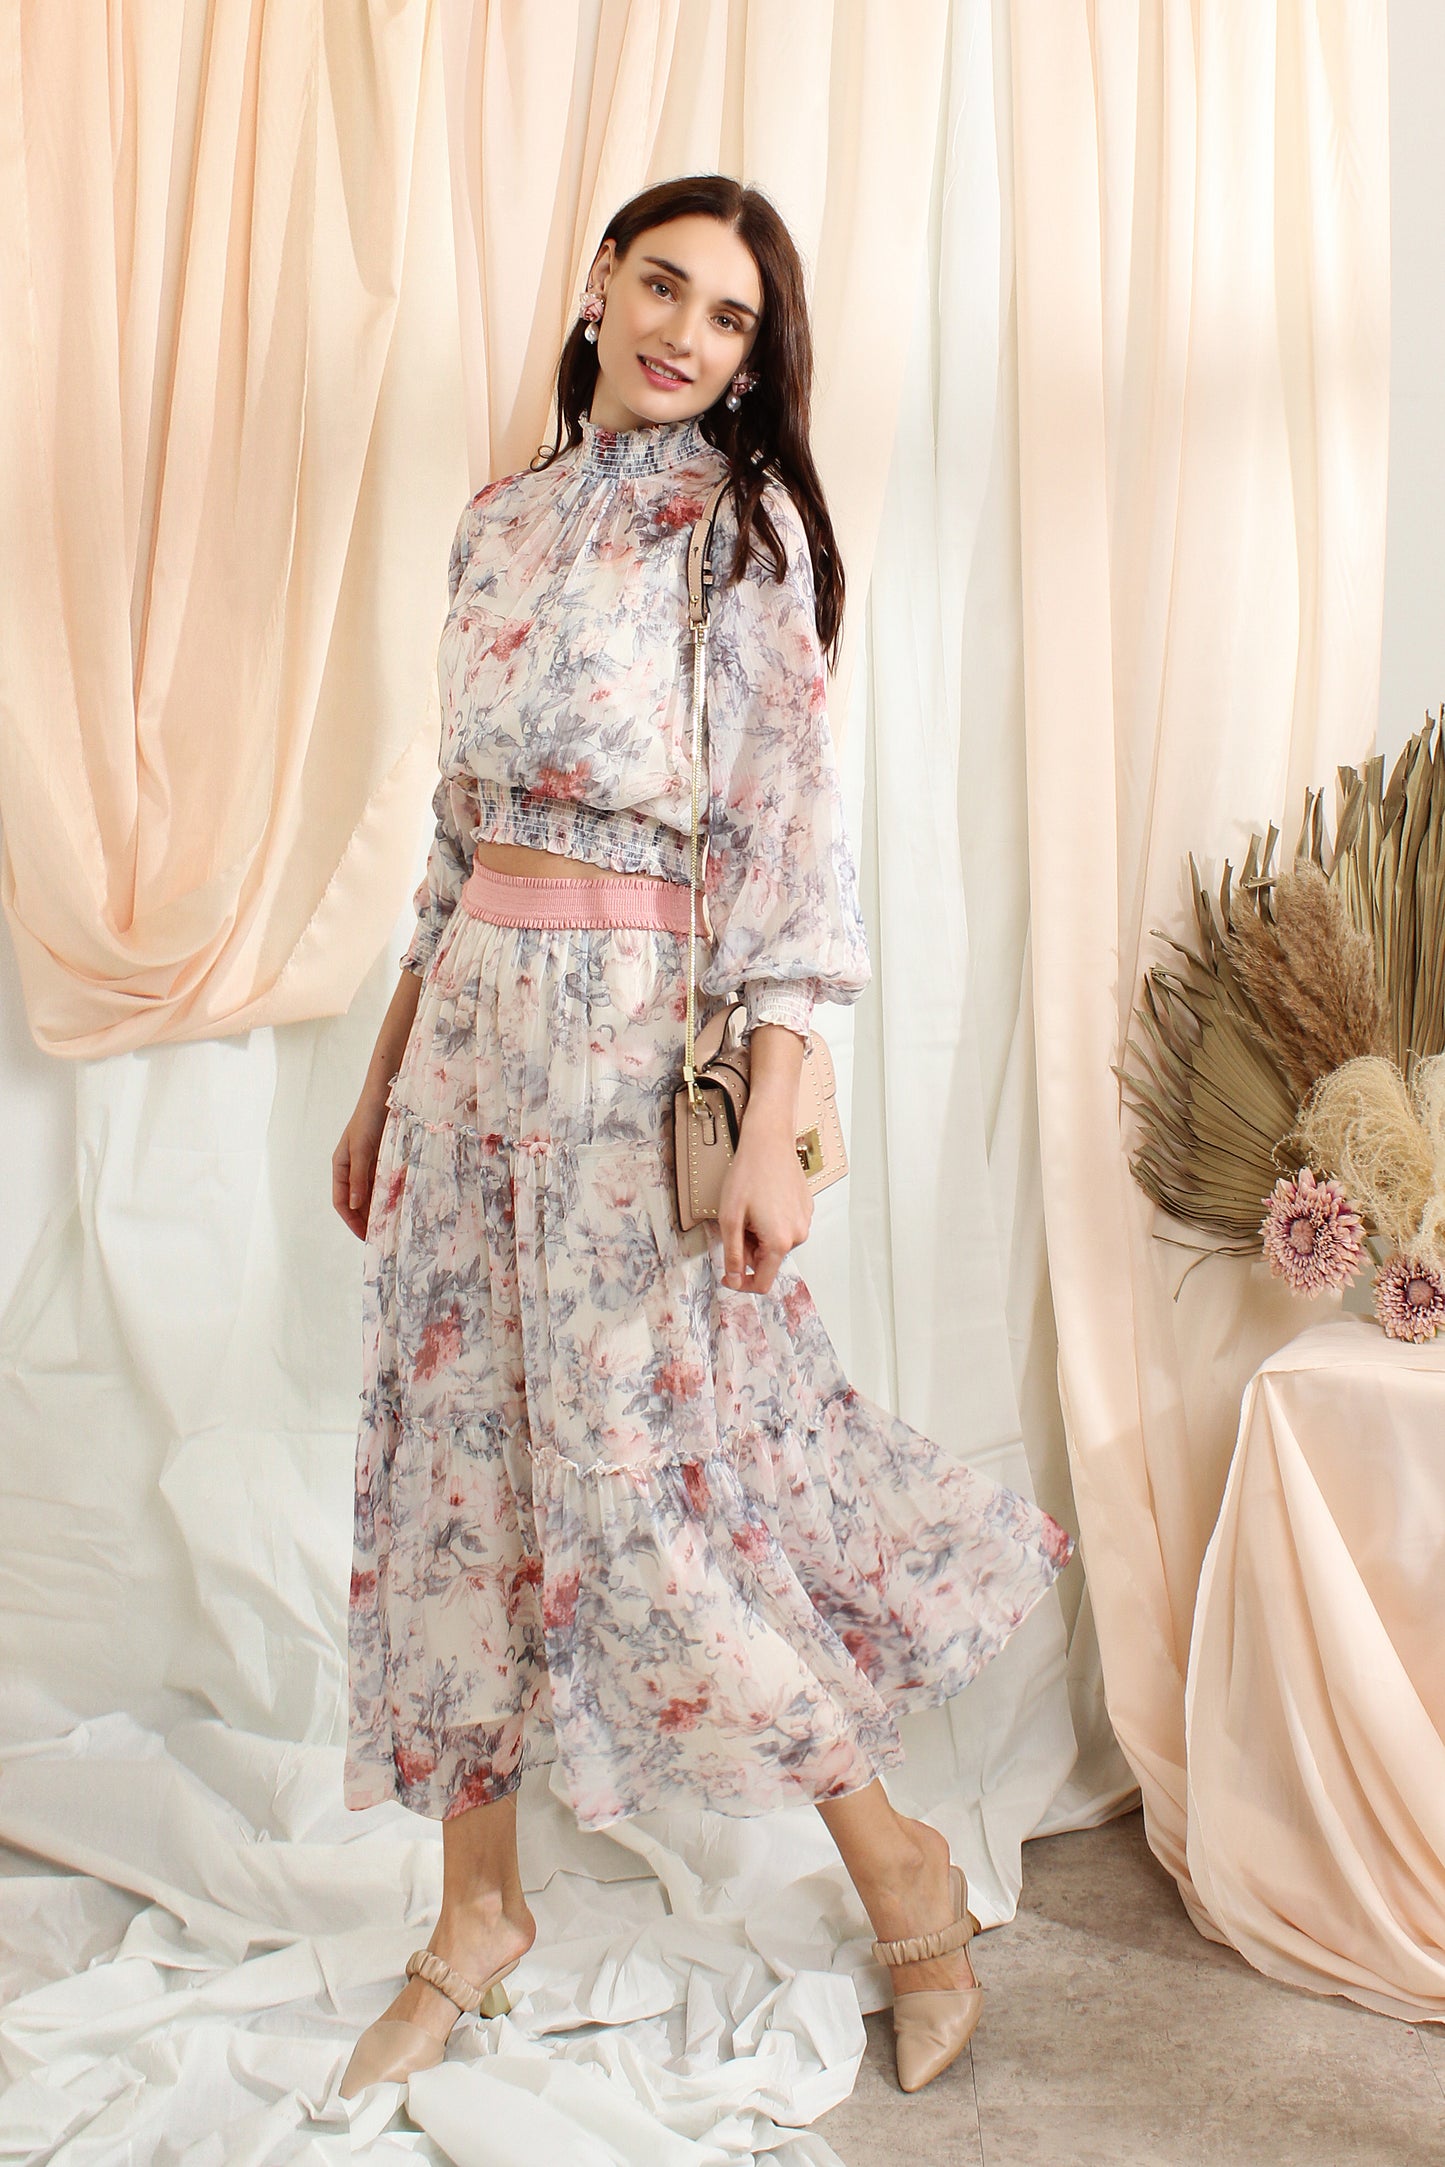 Ruffle Chiffon Sets With Floral Prints